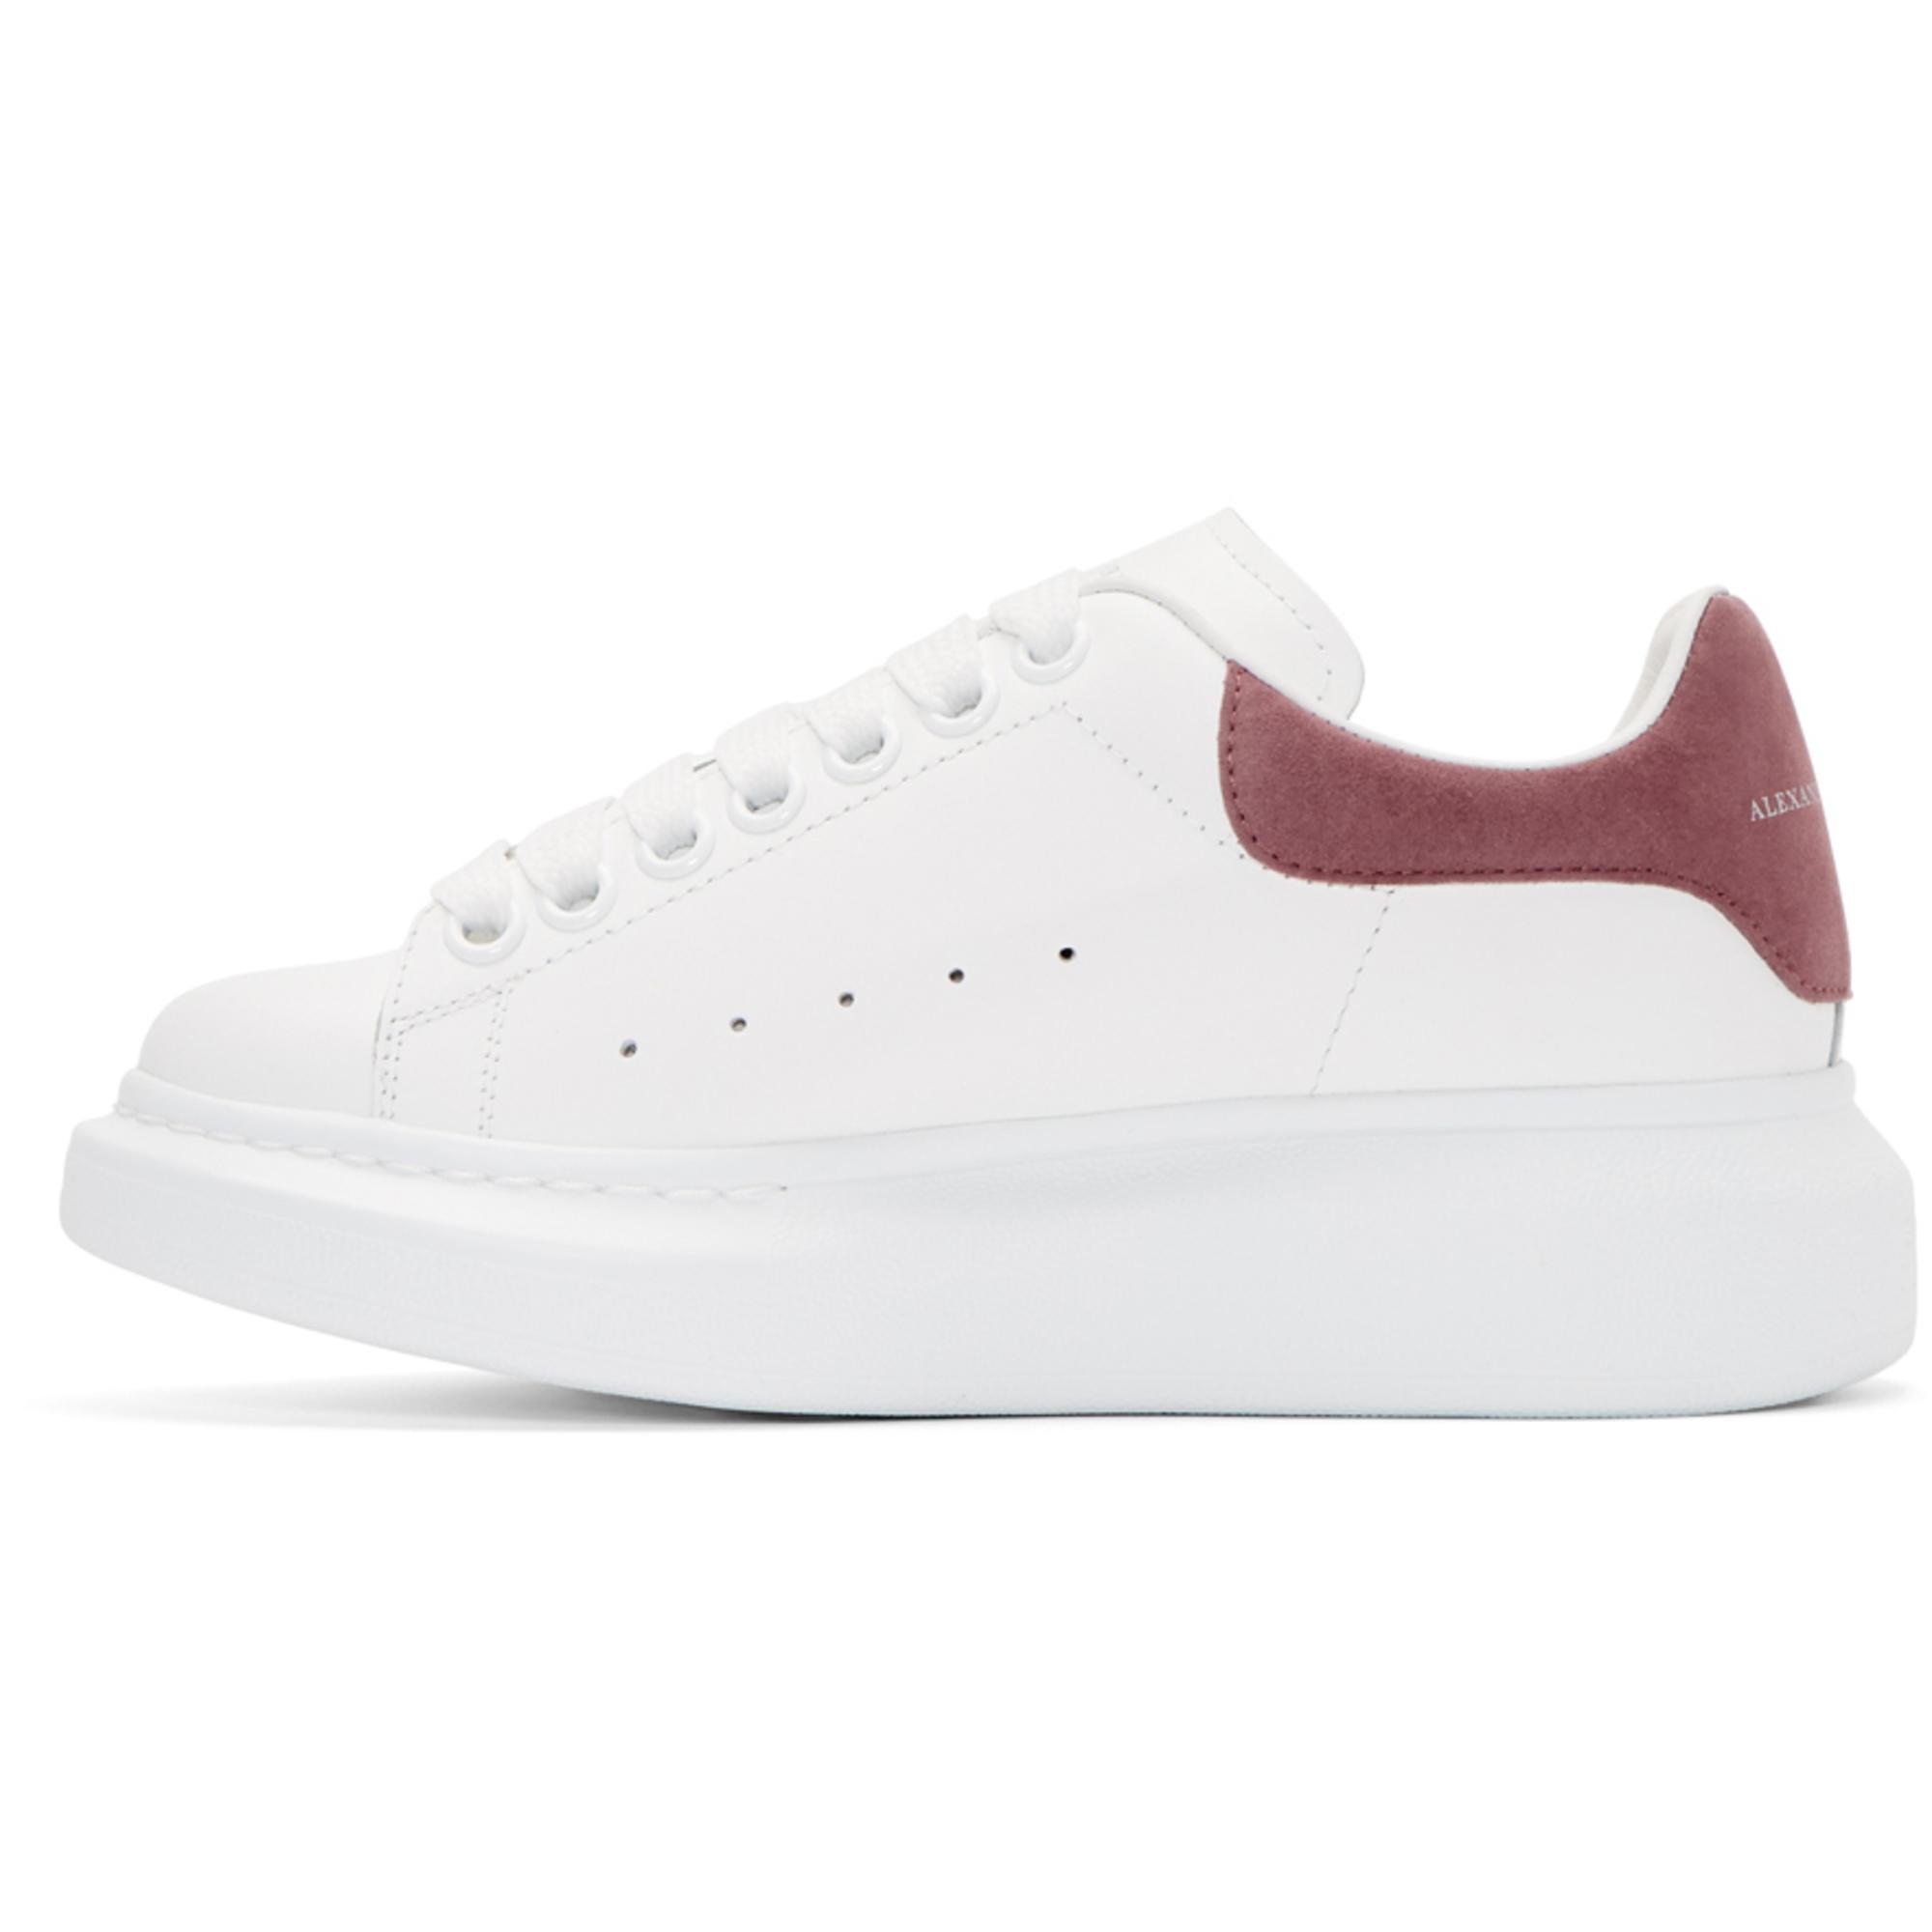 Lyst - Alexander McQueen White And Pink Oversized Sneakers in White